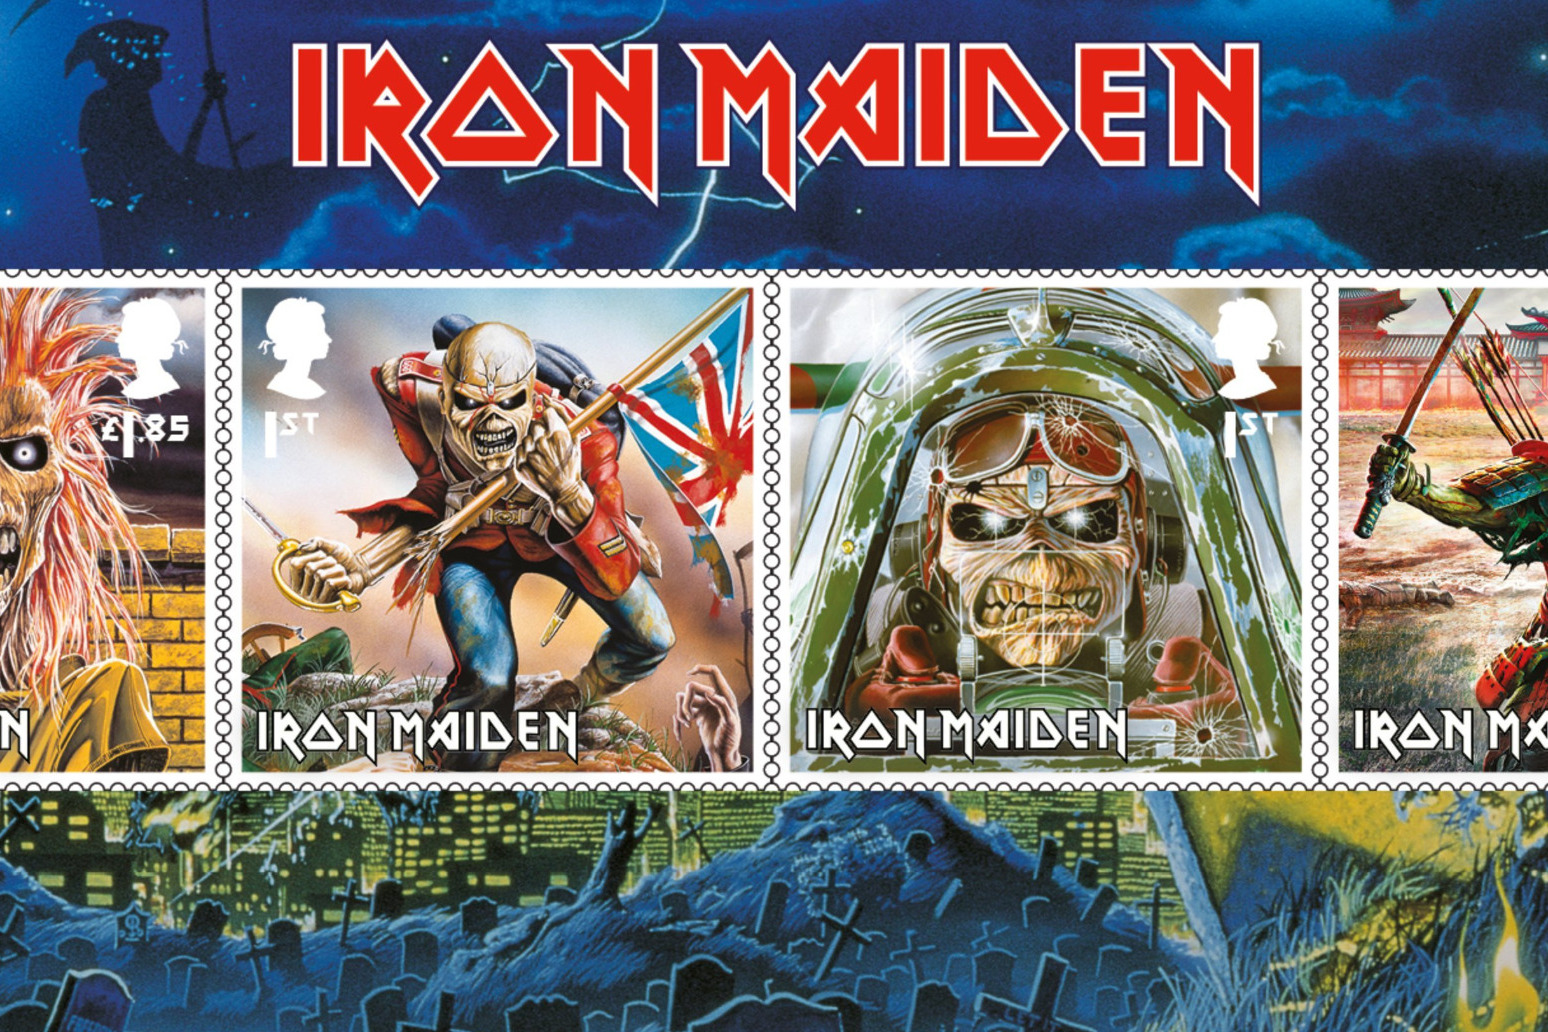 Royal Mail creates Iron Maiden stamps to pay tribute to ‘bona fide rock legends’ 